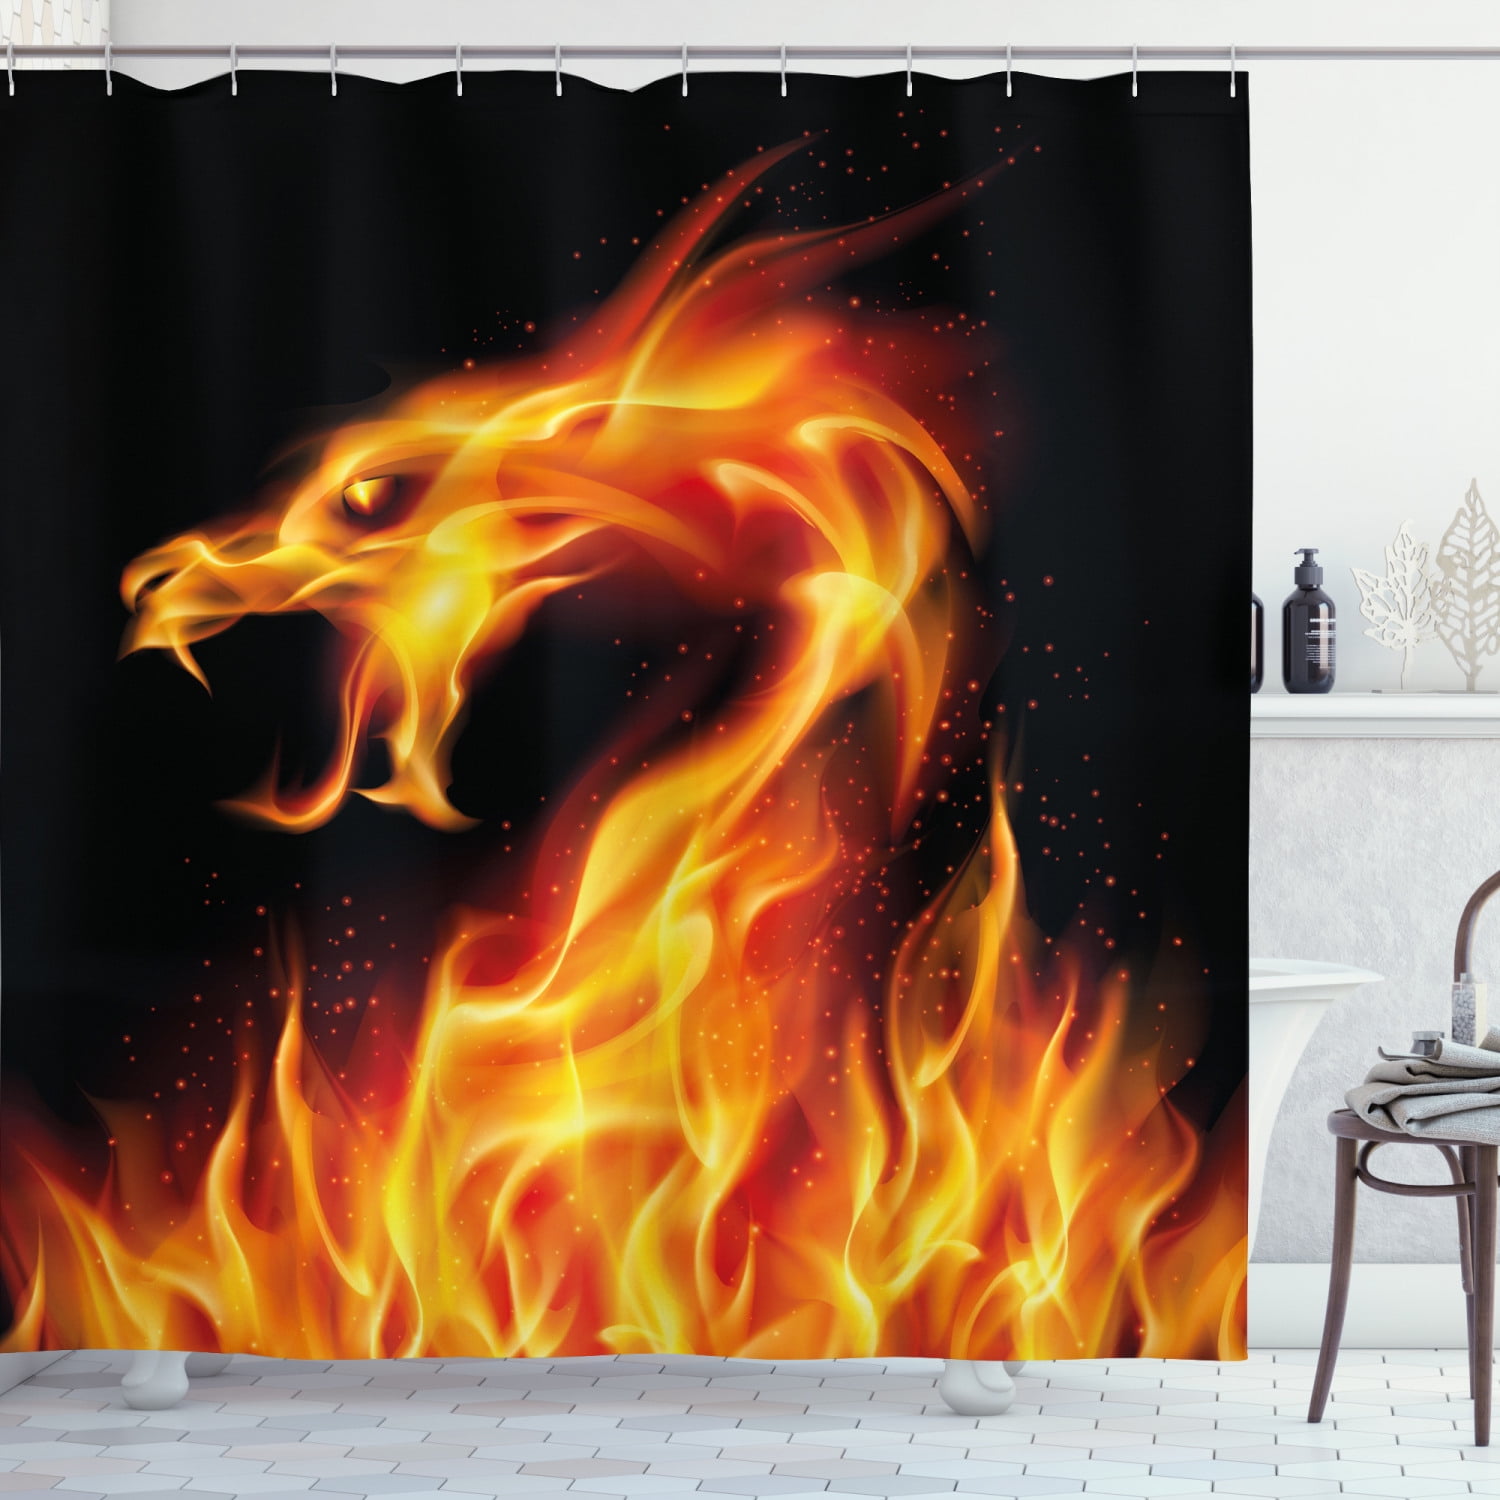 72X72" Abstract Blue And Red Fiery Dragons Shower Curtain Set Bathroom Bath Mat 